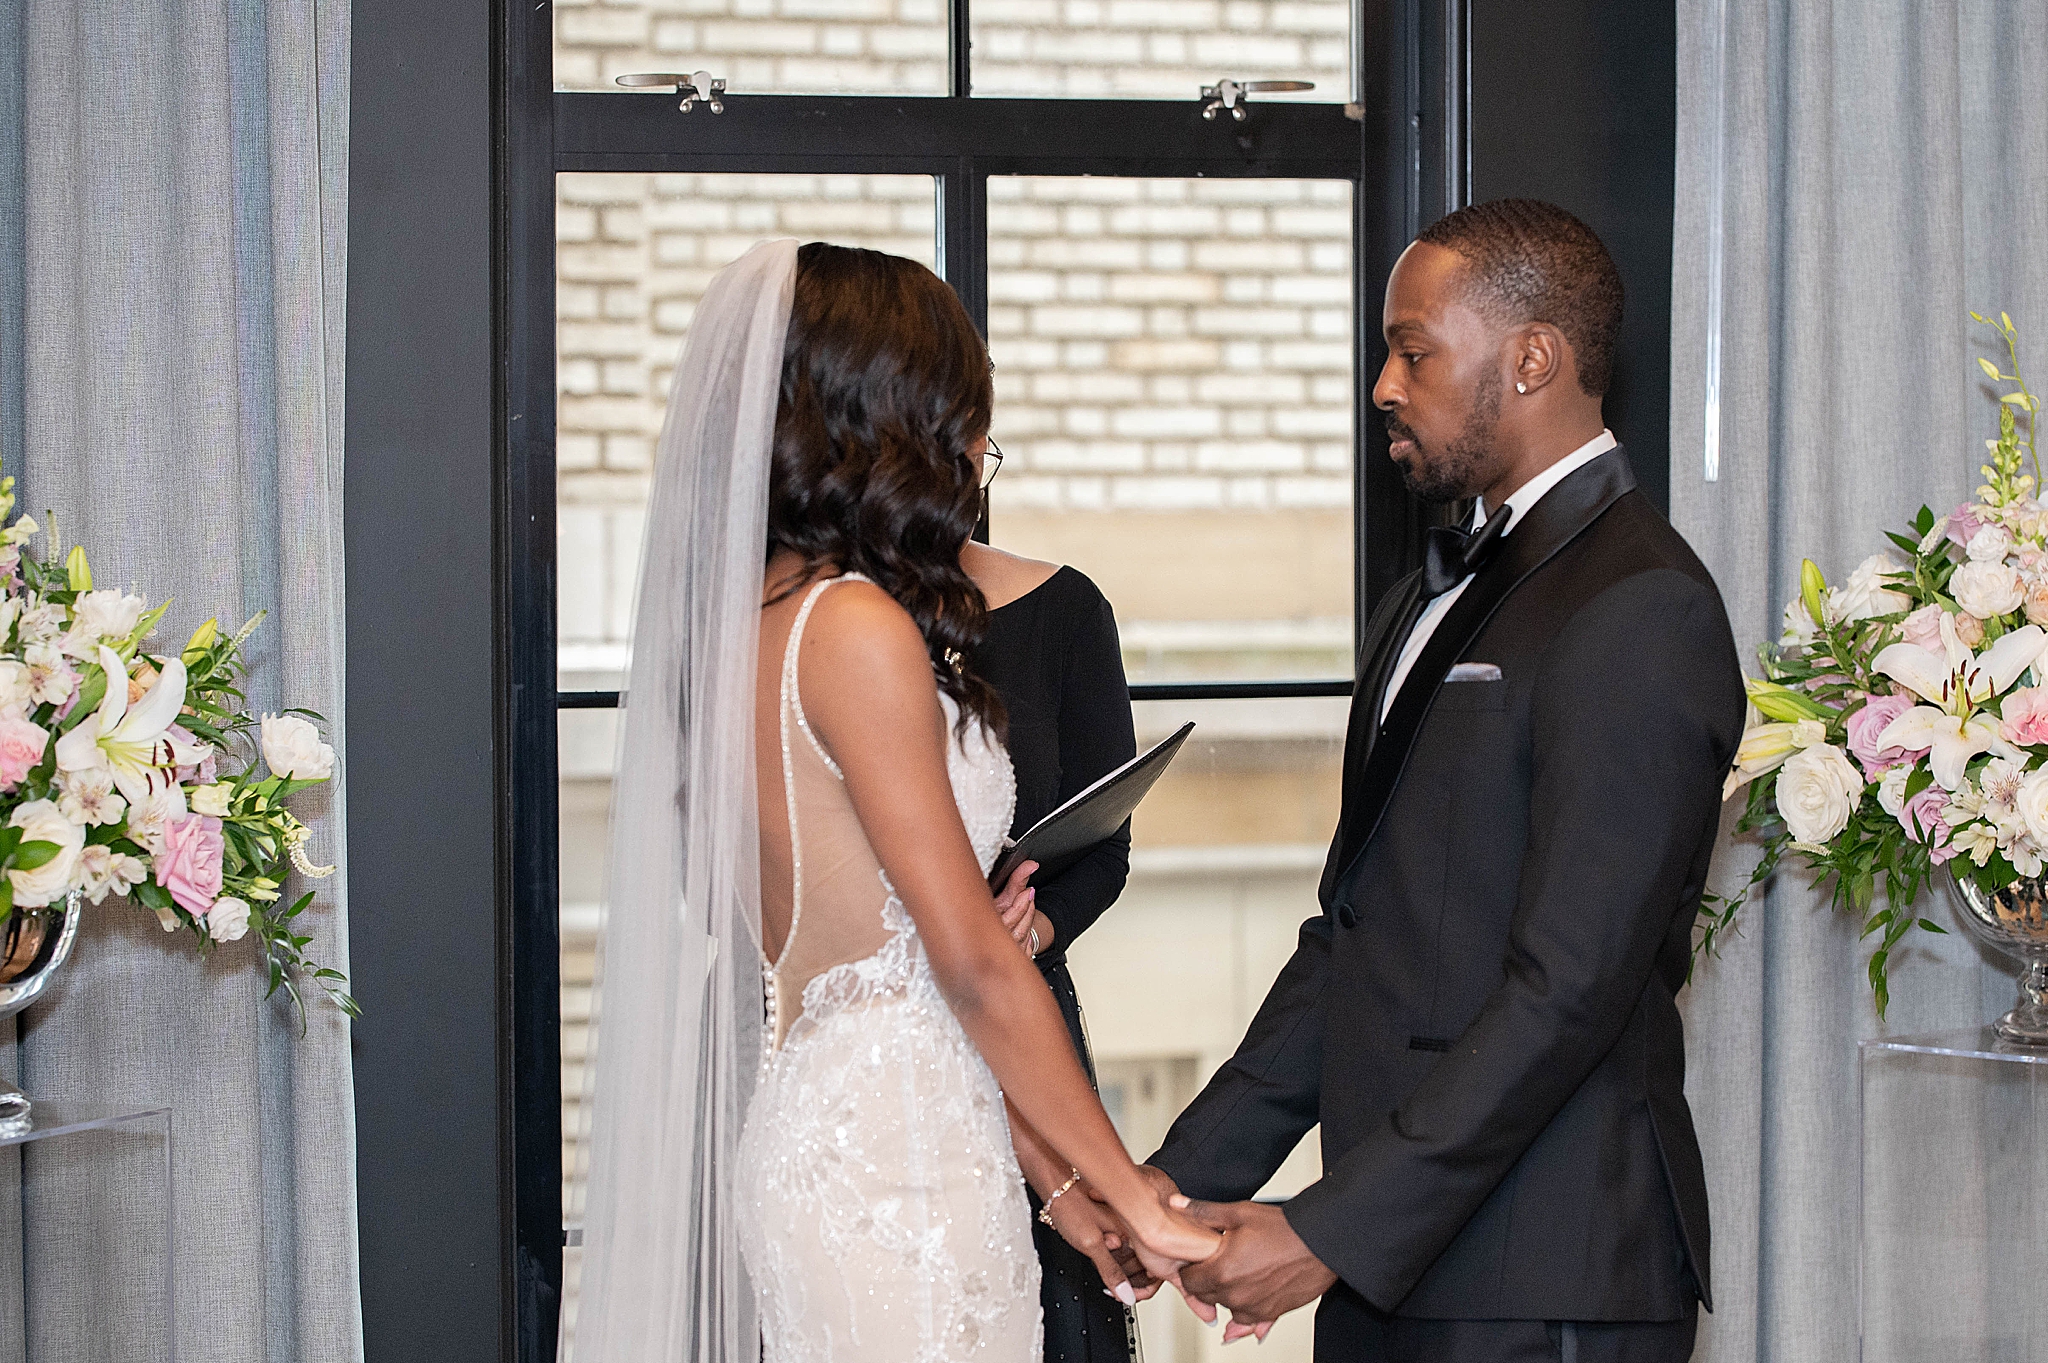 newlyweds exchange vows during Intimate LINE DC Wedding ceremony